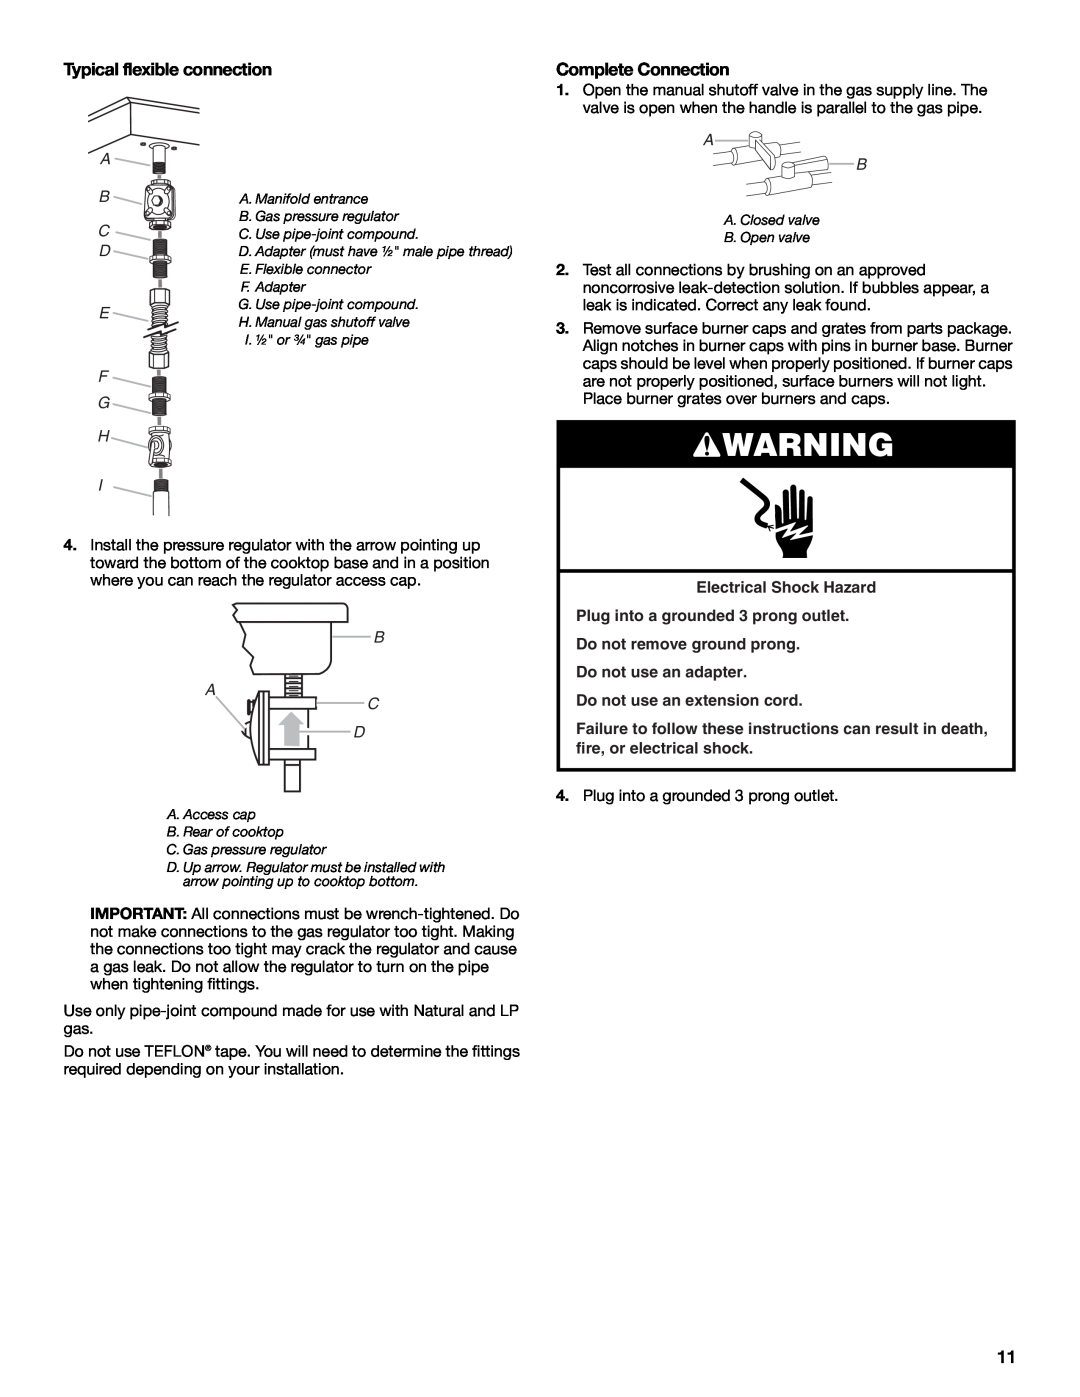 Jenn-Air W10574732A installation instructions Typical flexible connection, Complete Connection, B A C D 